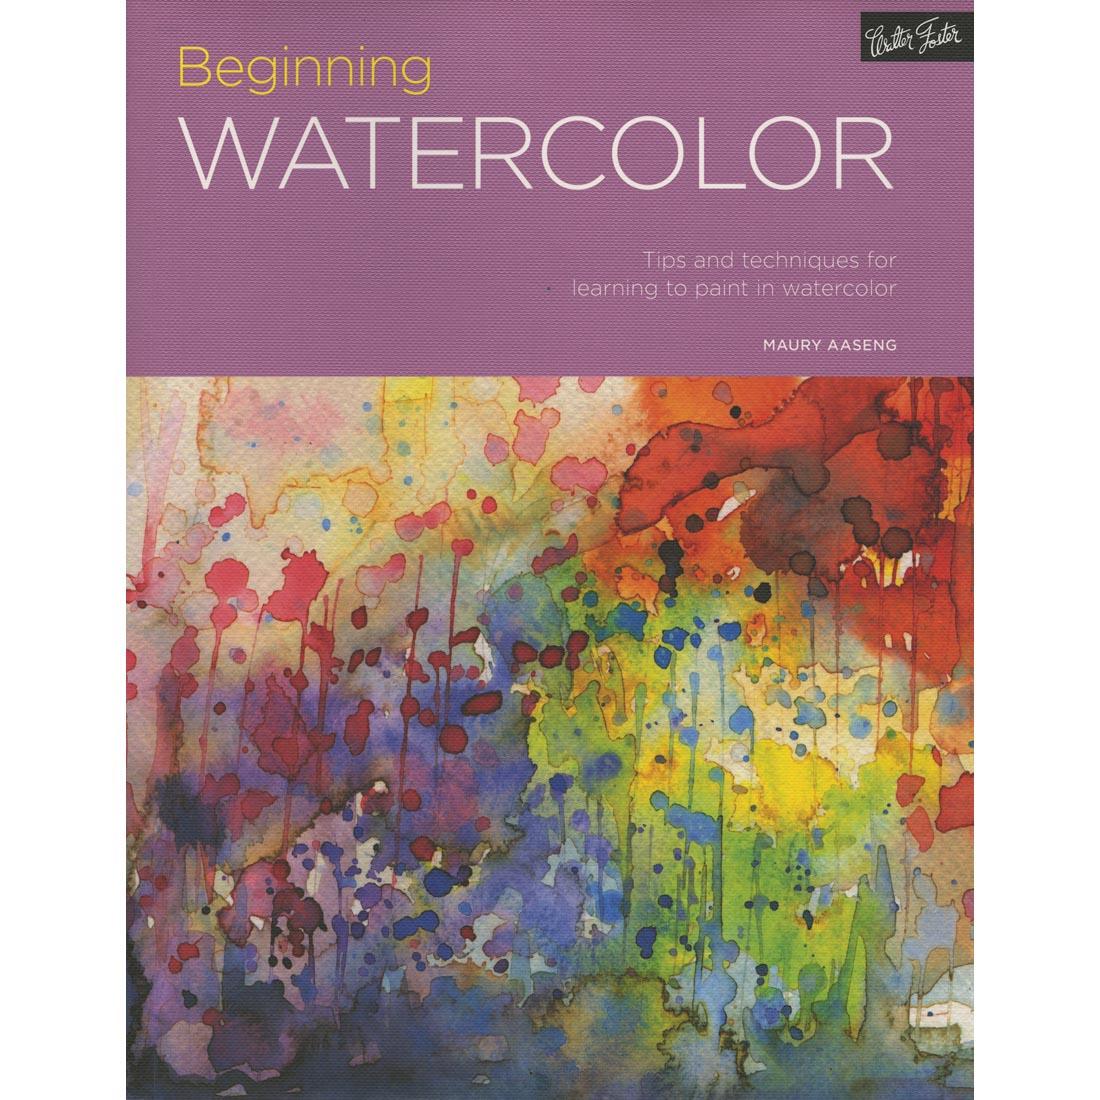 cover of book - Beginning Watercolor: Tips and Techniques For Learning To Paint In Watercolor